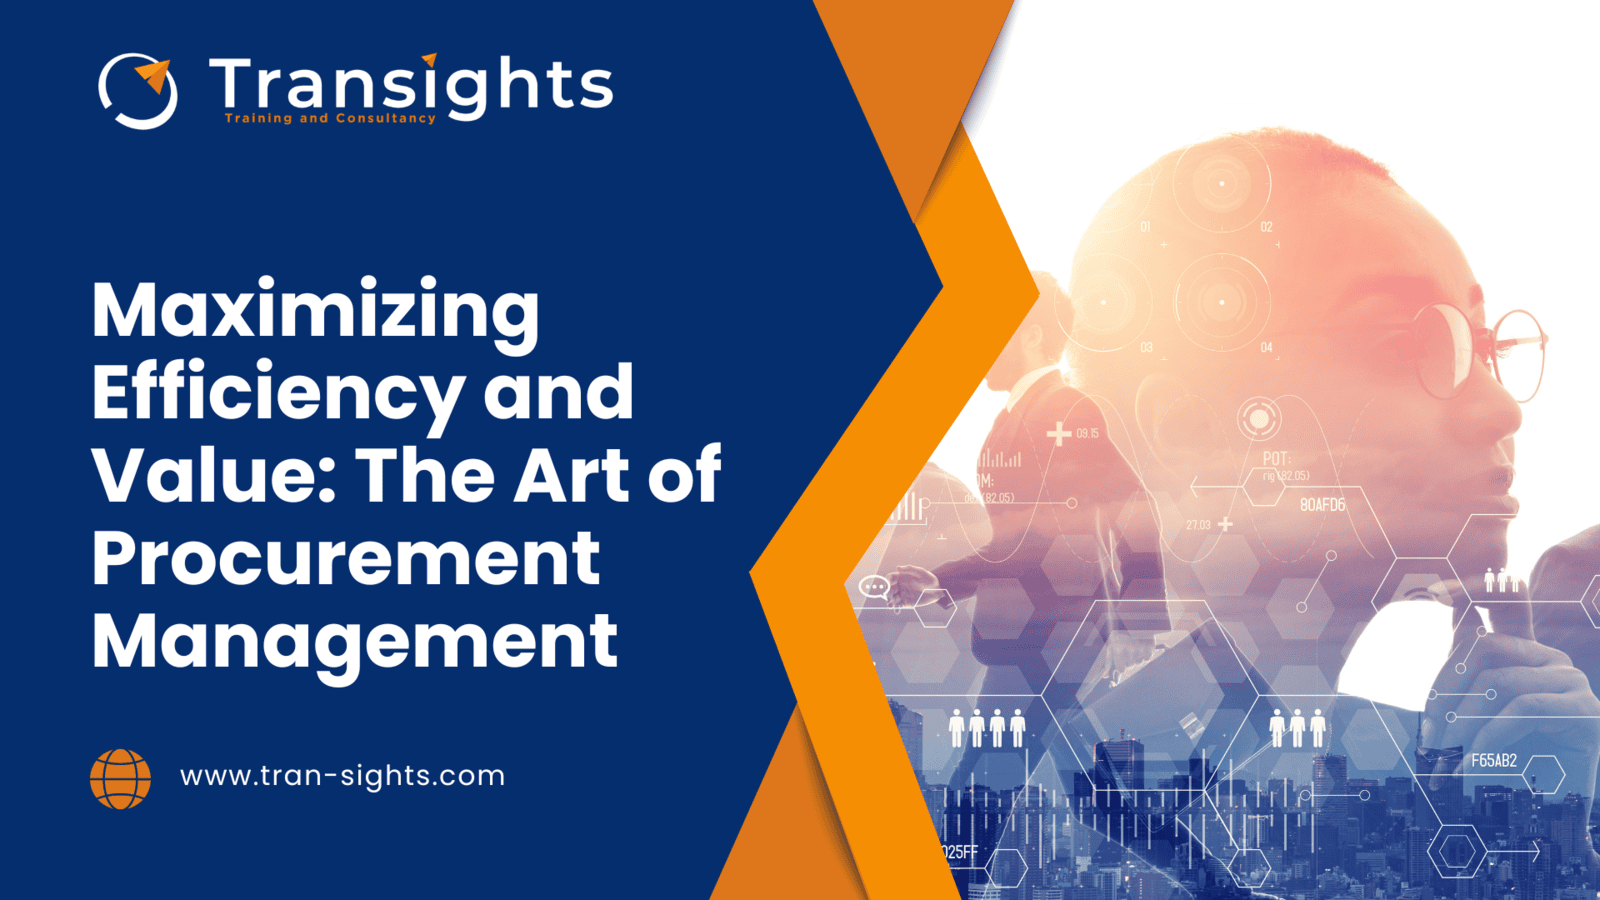 Maximizing Efficiency and Value: The Art of Procurement Management